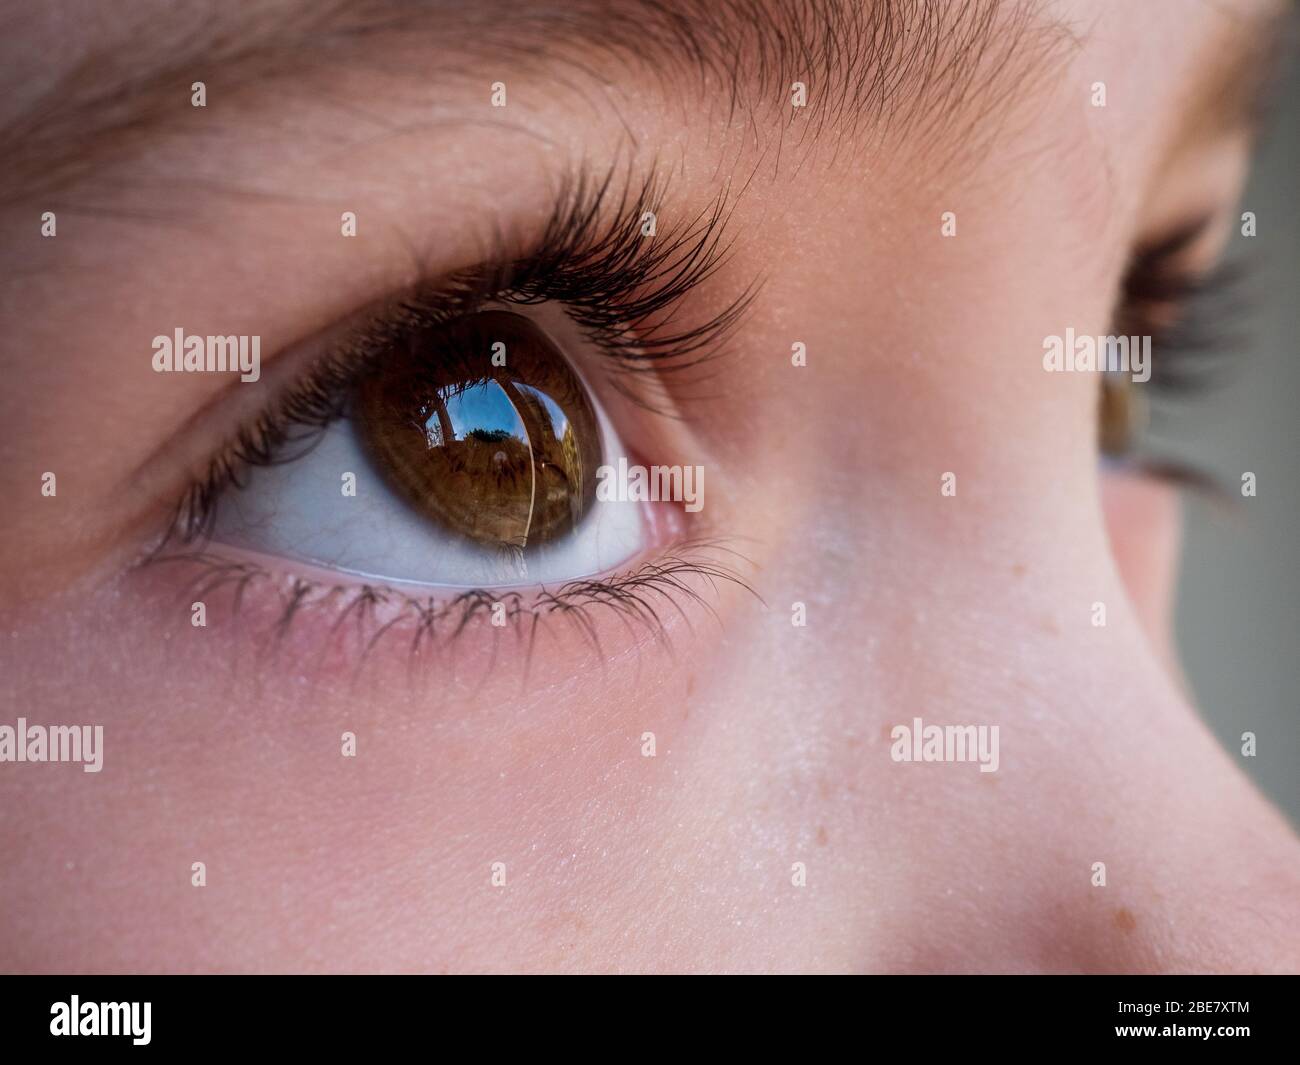 Close up image of a girl's brown eye looking out of a window Stock Photo